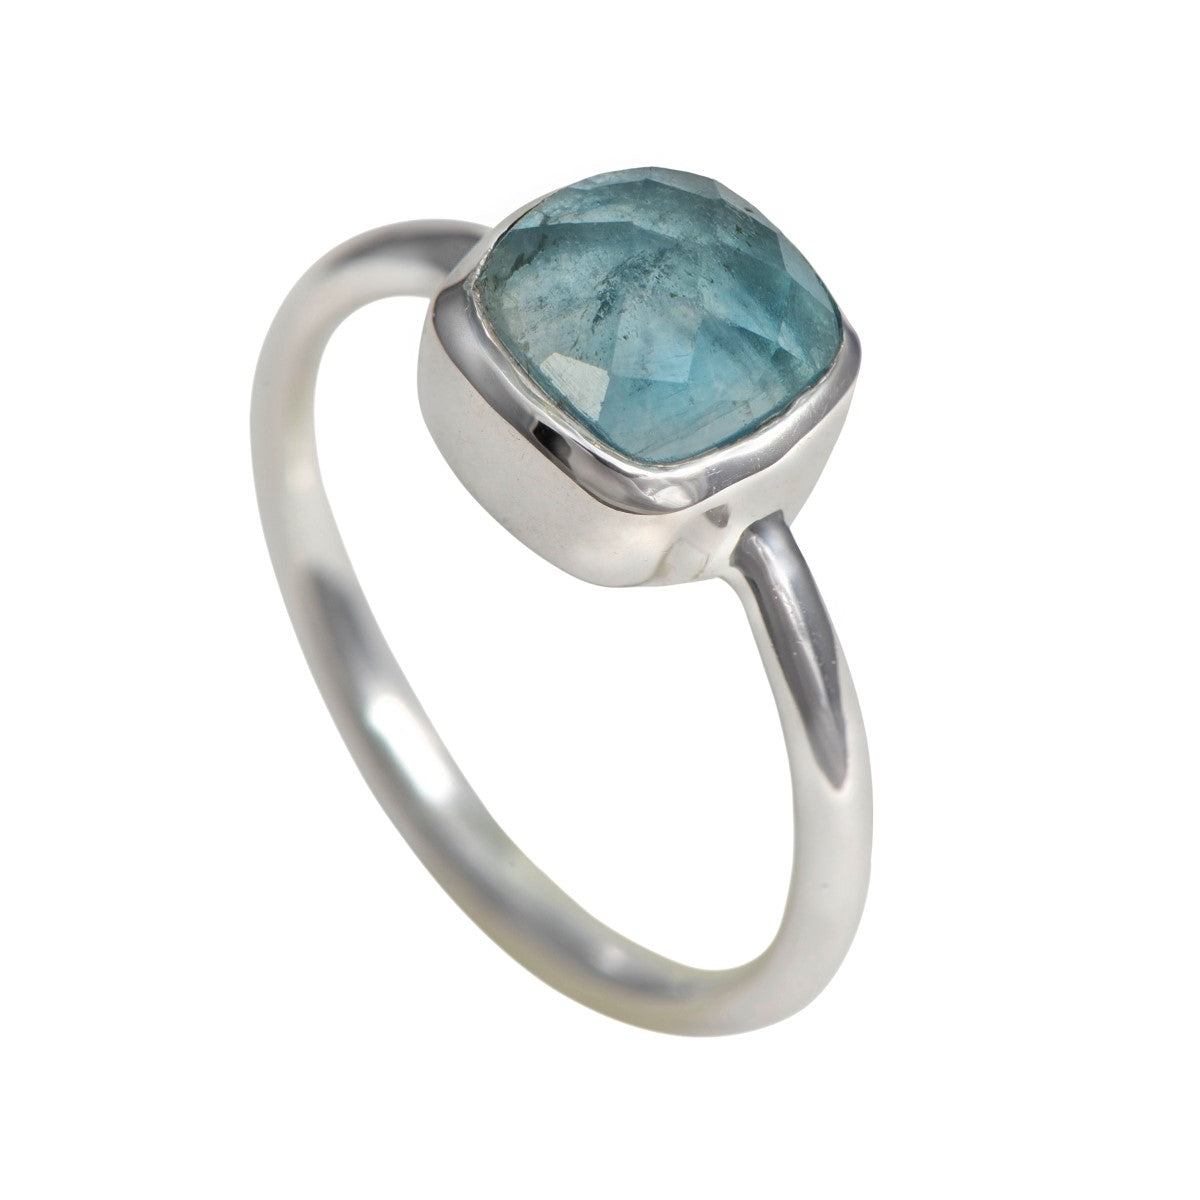 Faceted Square Cut Natural Gemstone Sterling Silver Solitaire Ring - Apatite